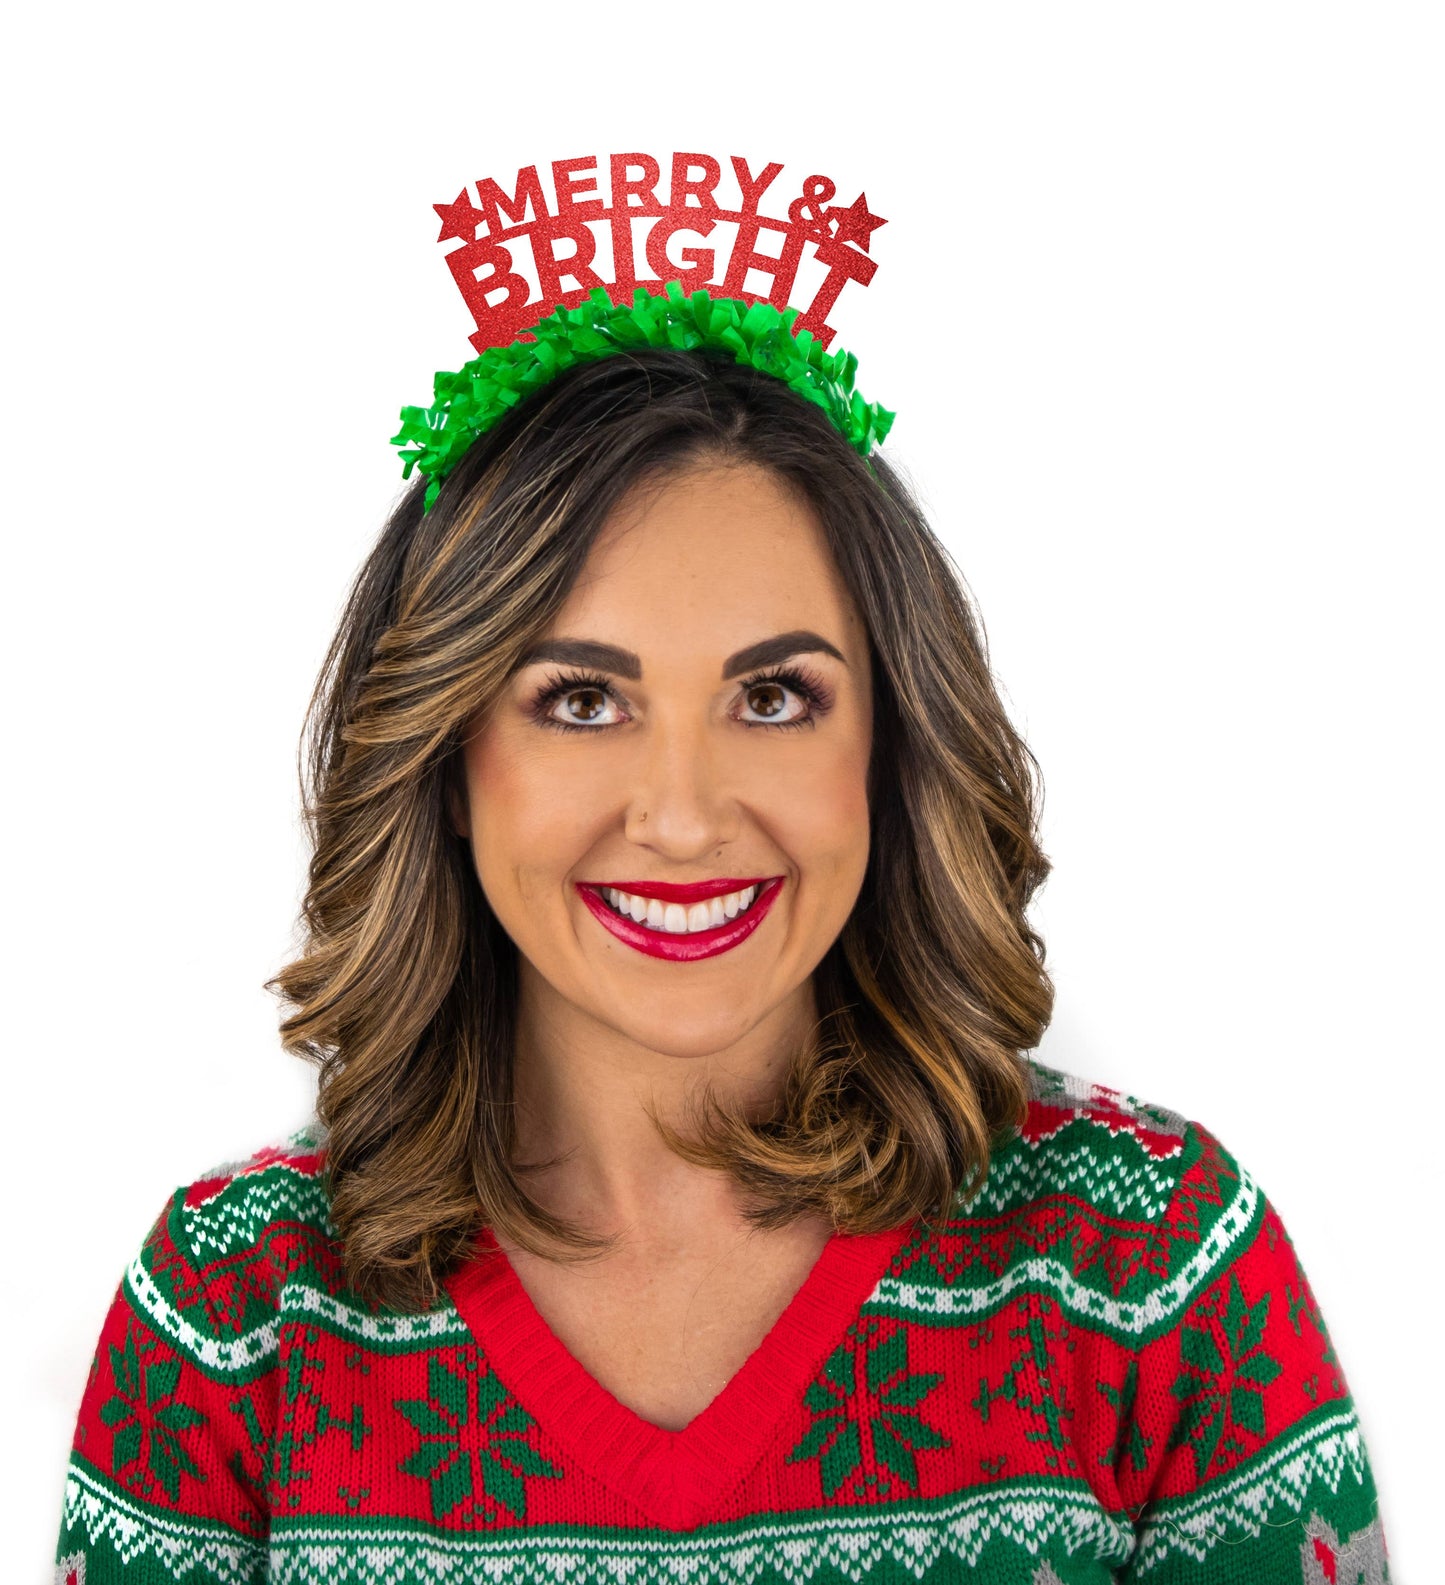 Merry & Bright Holiday Christmas Party Crown Headband